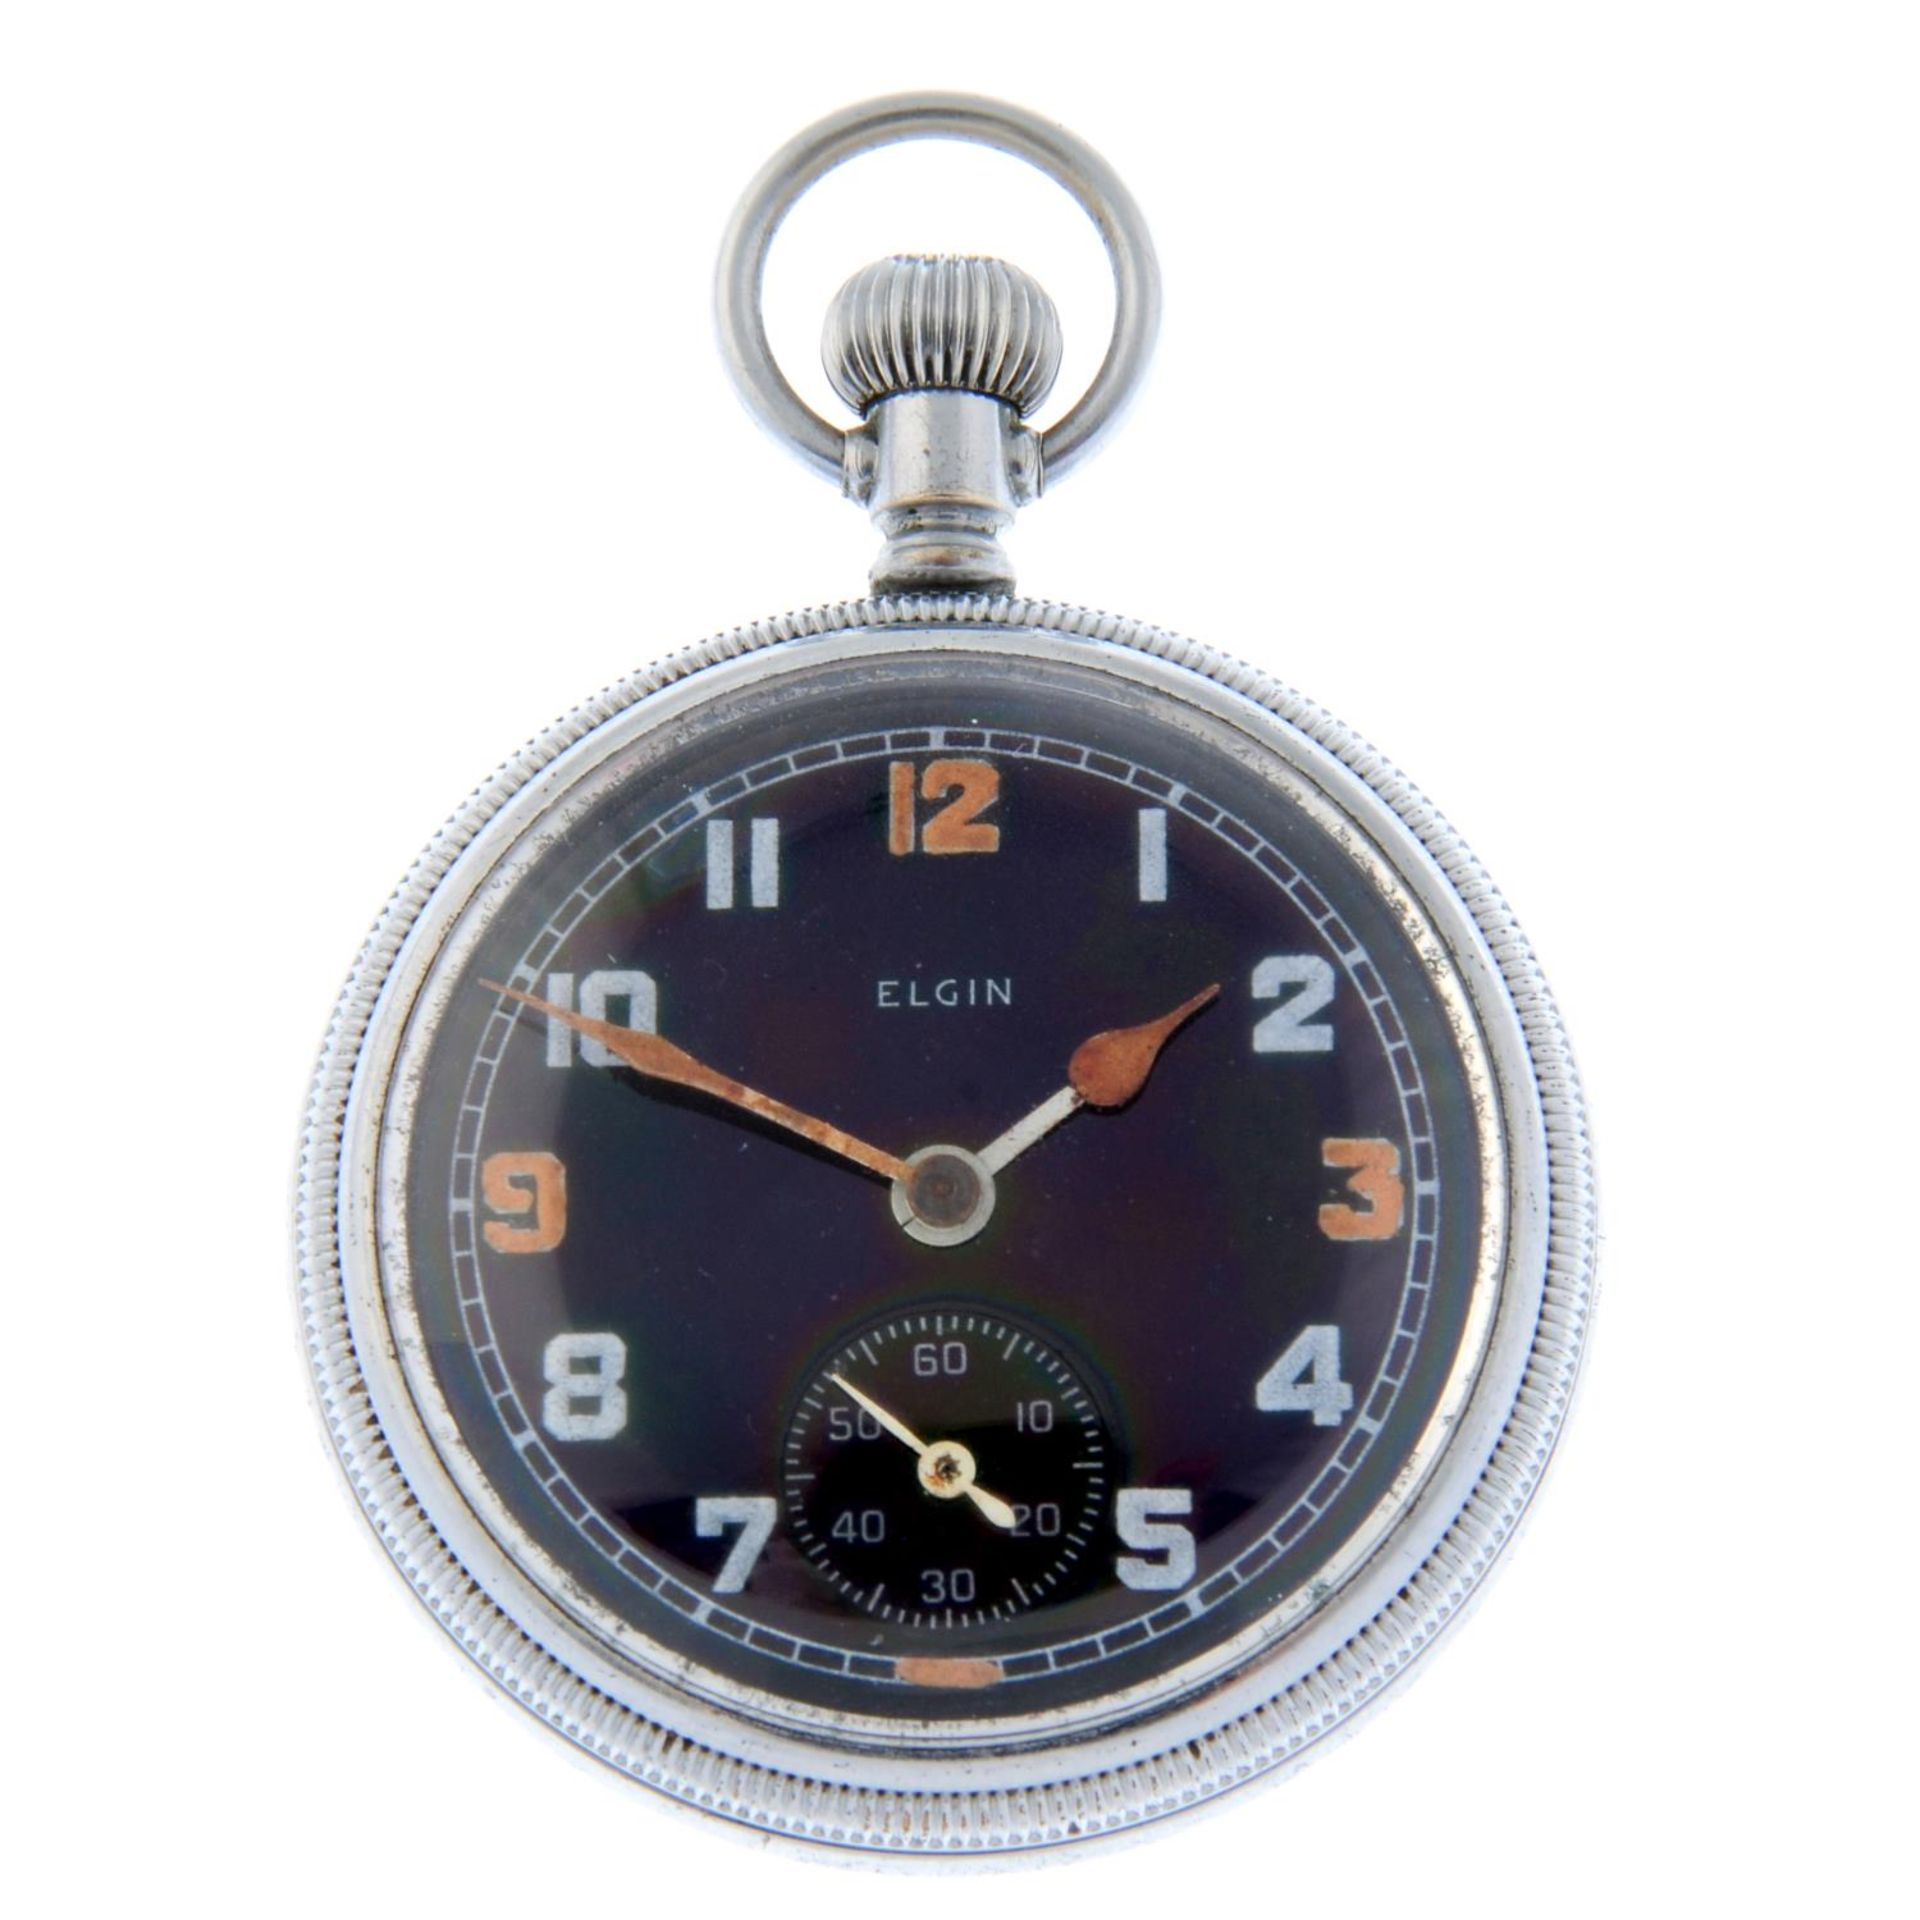 A military issue open face pocket watch by Elgin.